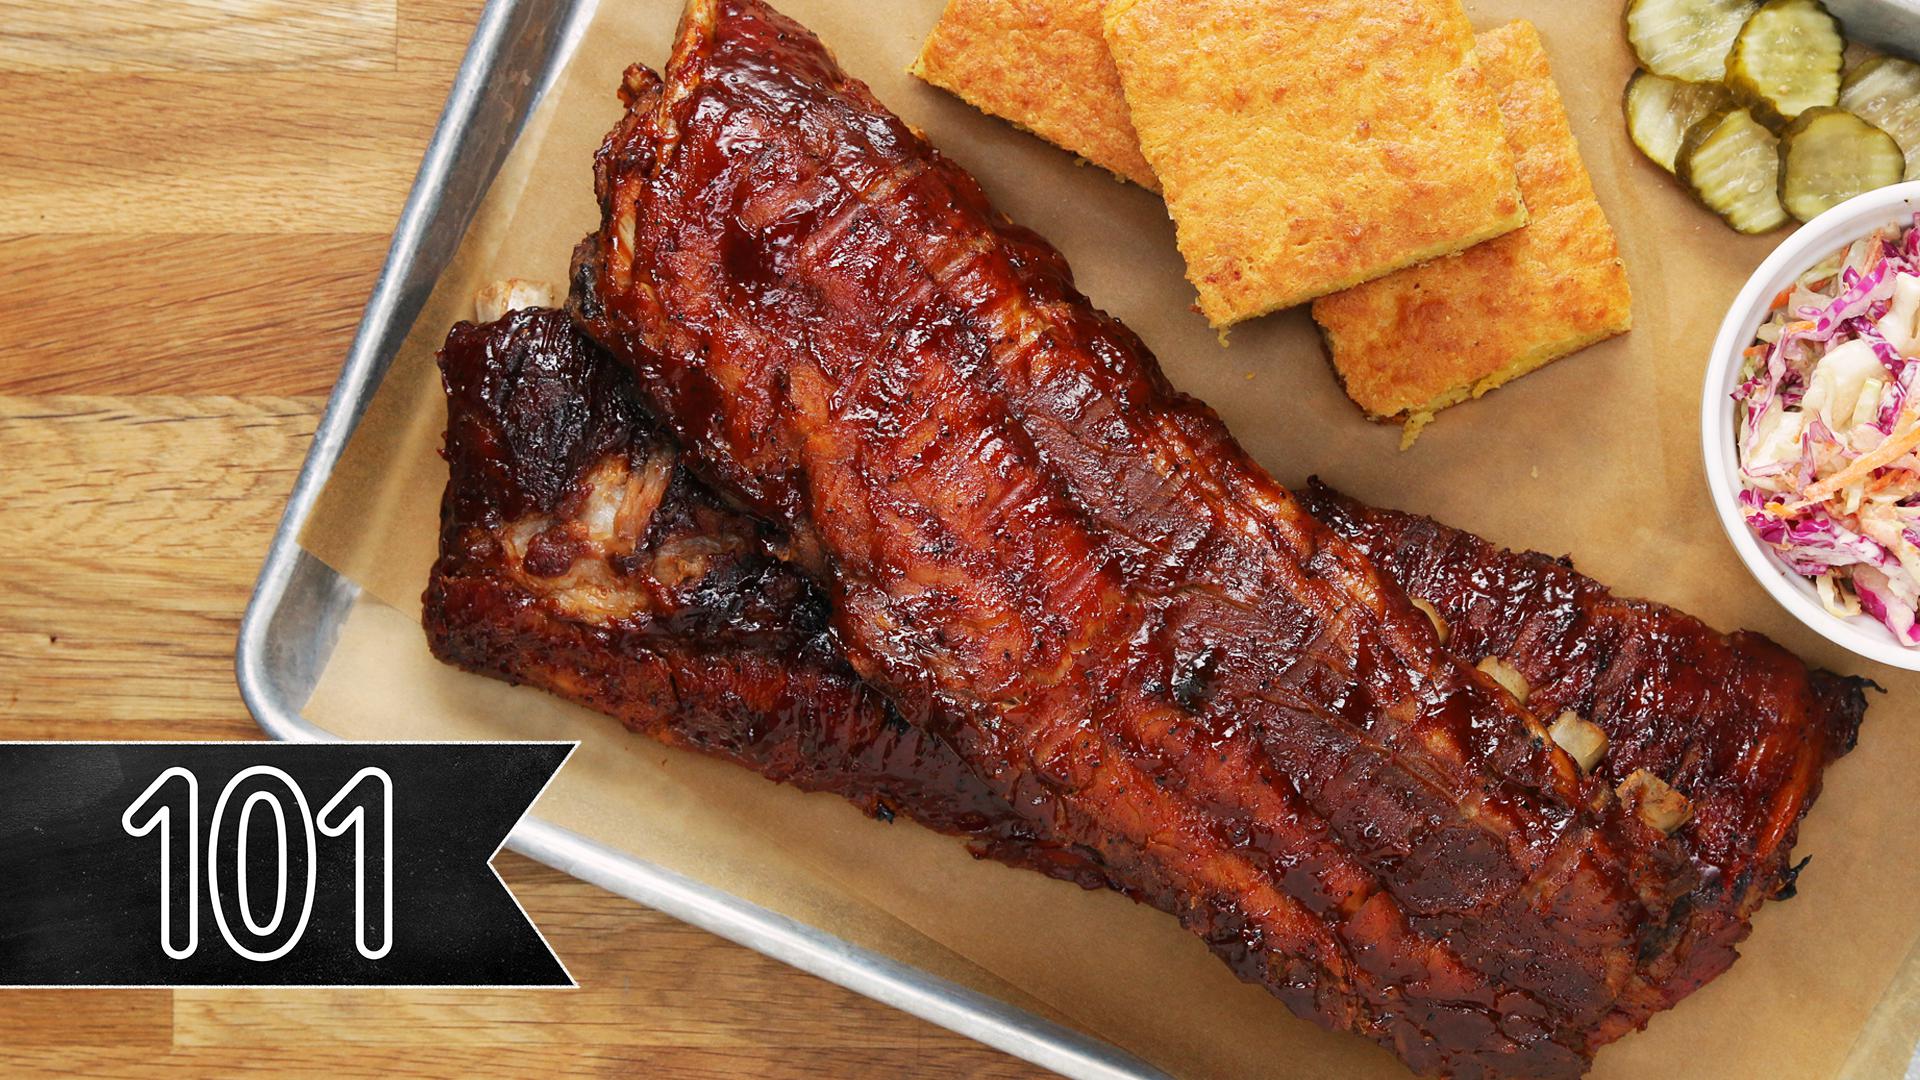 The Easiest Way To Make Great Bbq Ribs Recipe By Tasty,Rotisserie Oven